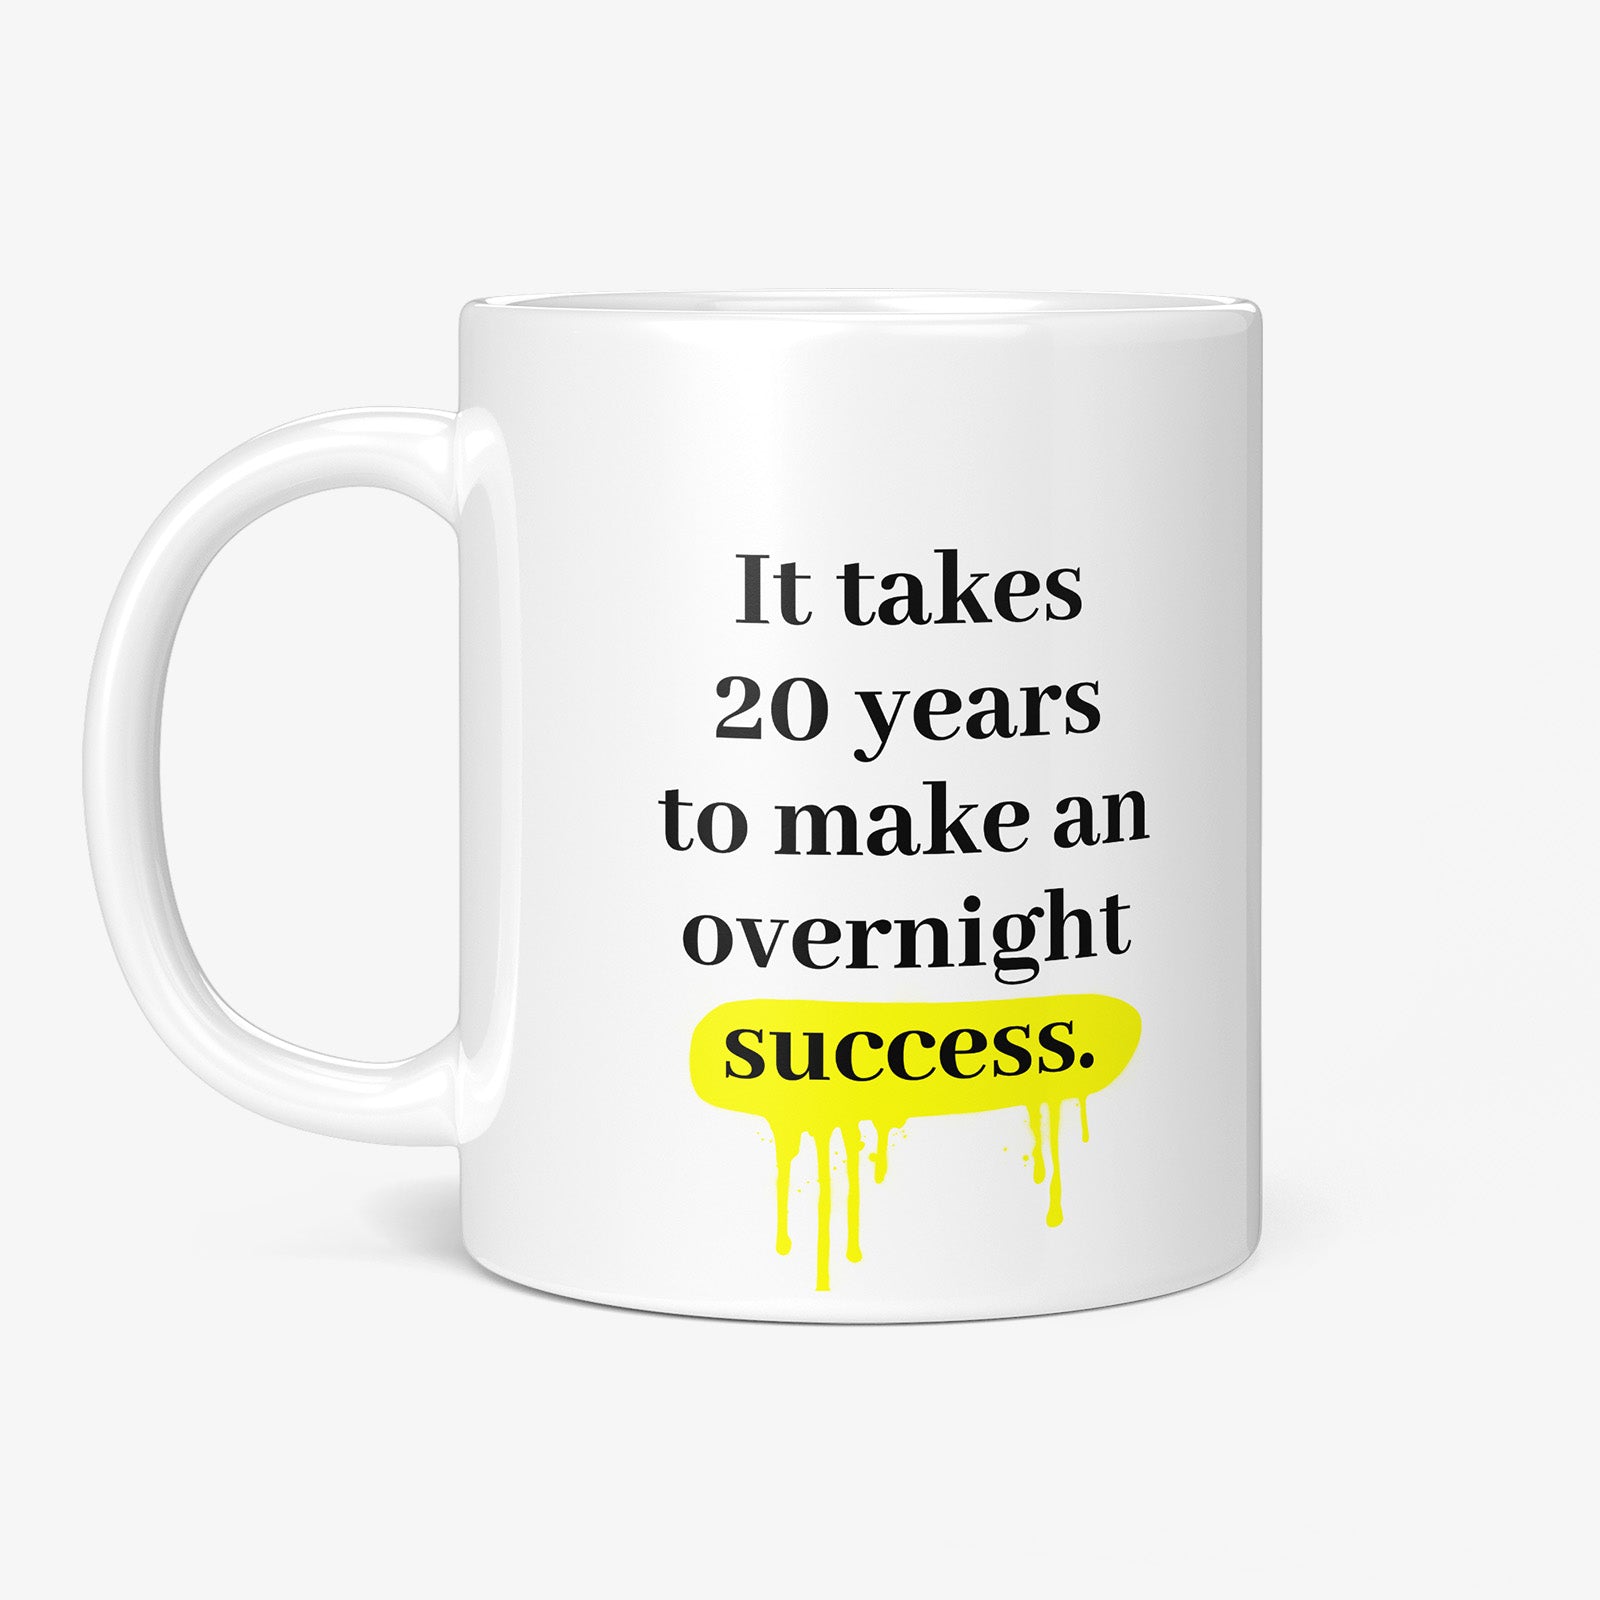 Be inspired by Eddie Cantor's famous quote, "It takes 20 years to make an overnight success" on this white and glossy 11oz coffee mug with the handle on the left.